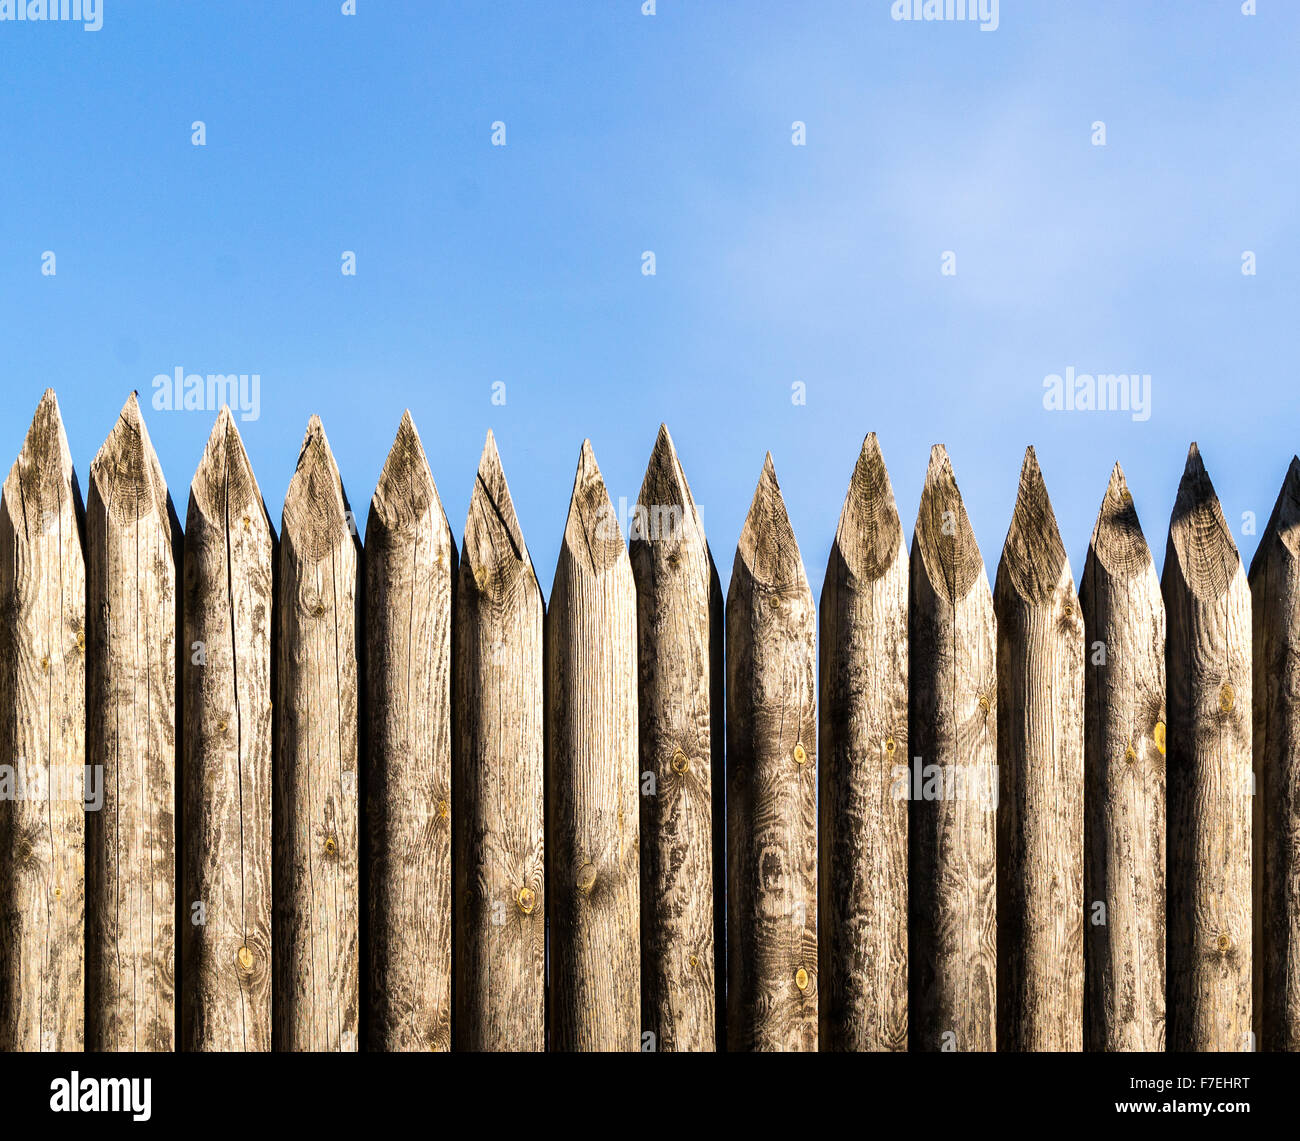 Rustic wooden palisade fencing forming a defensive barrier against a blue sky background Stock Photo